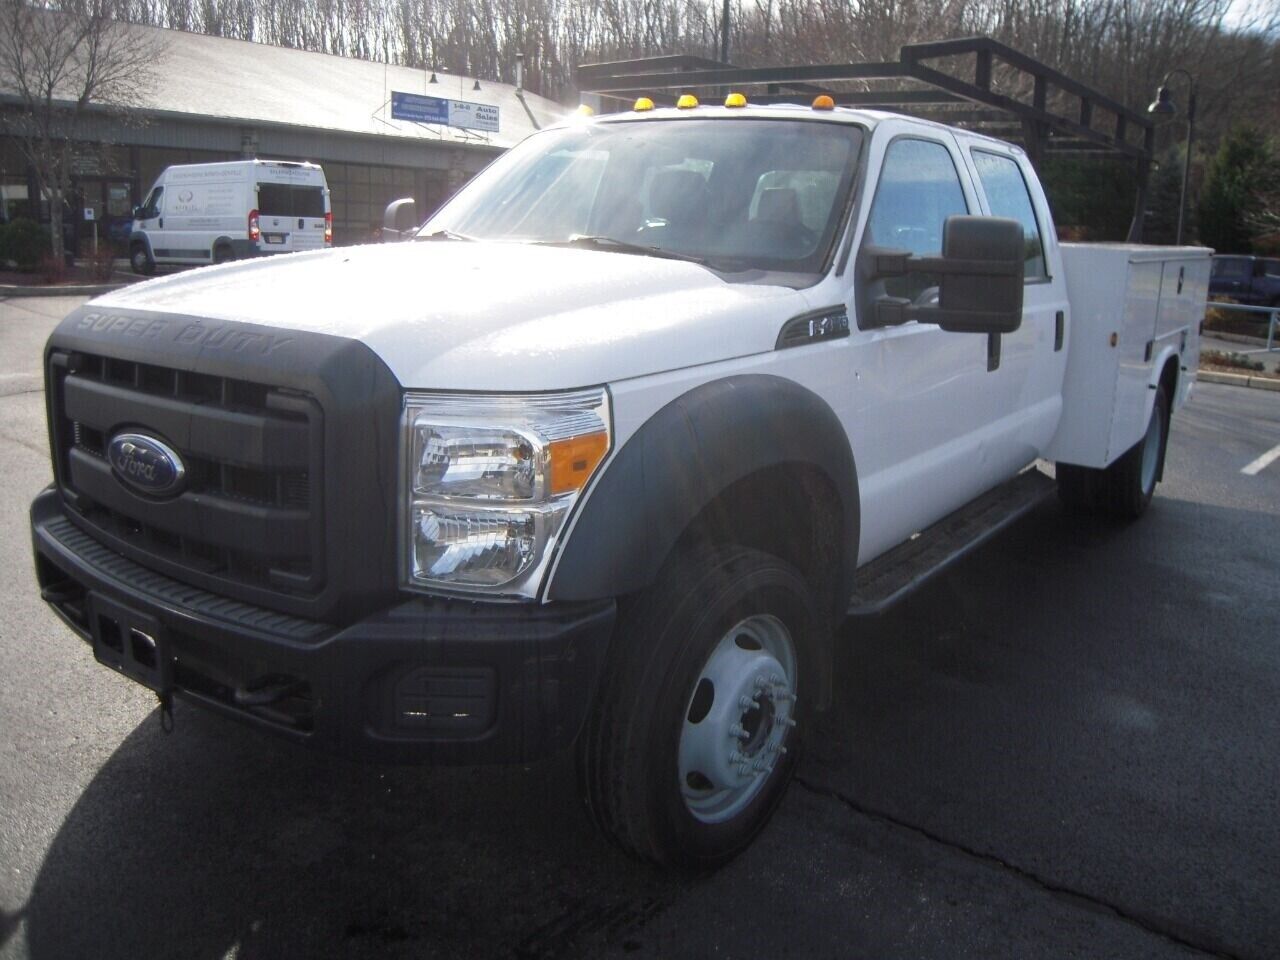 2015 Ford F-450 4X2 4dr Crew Cab 176.2 200.2 in. WB